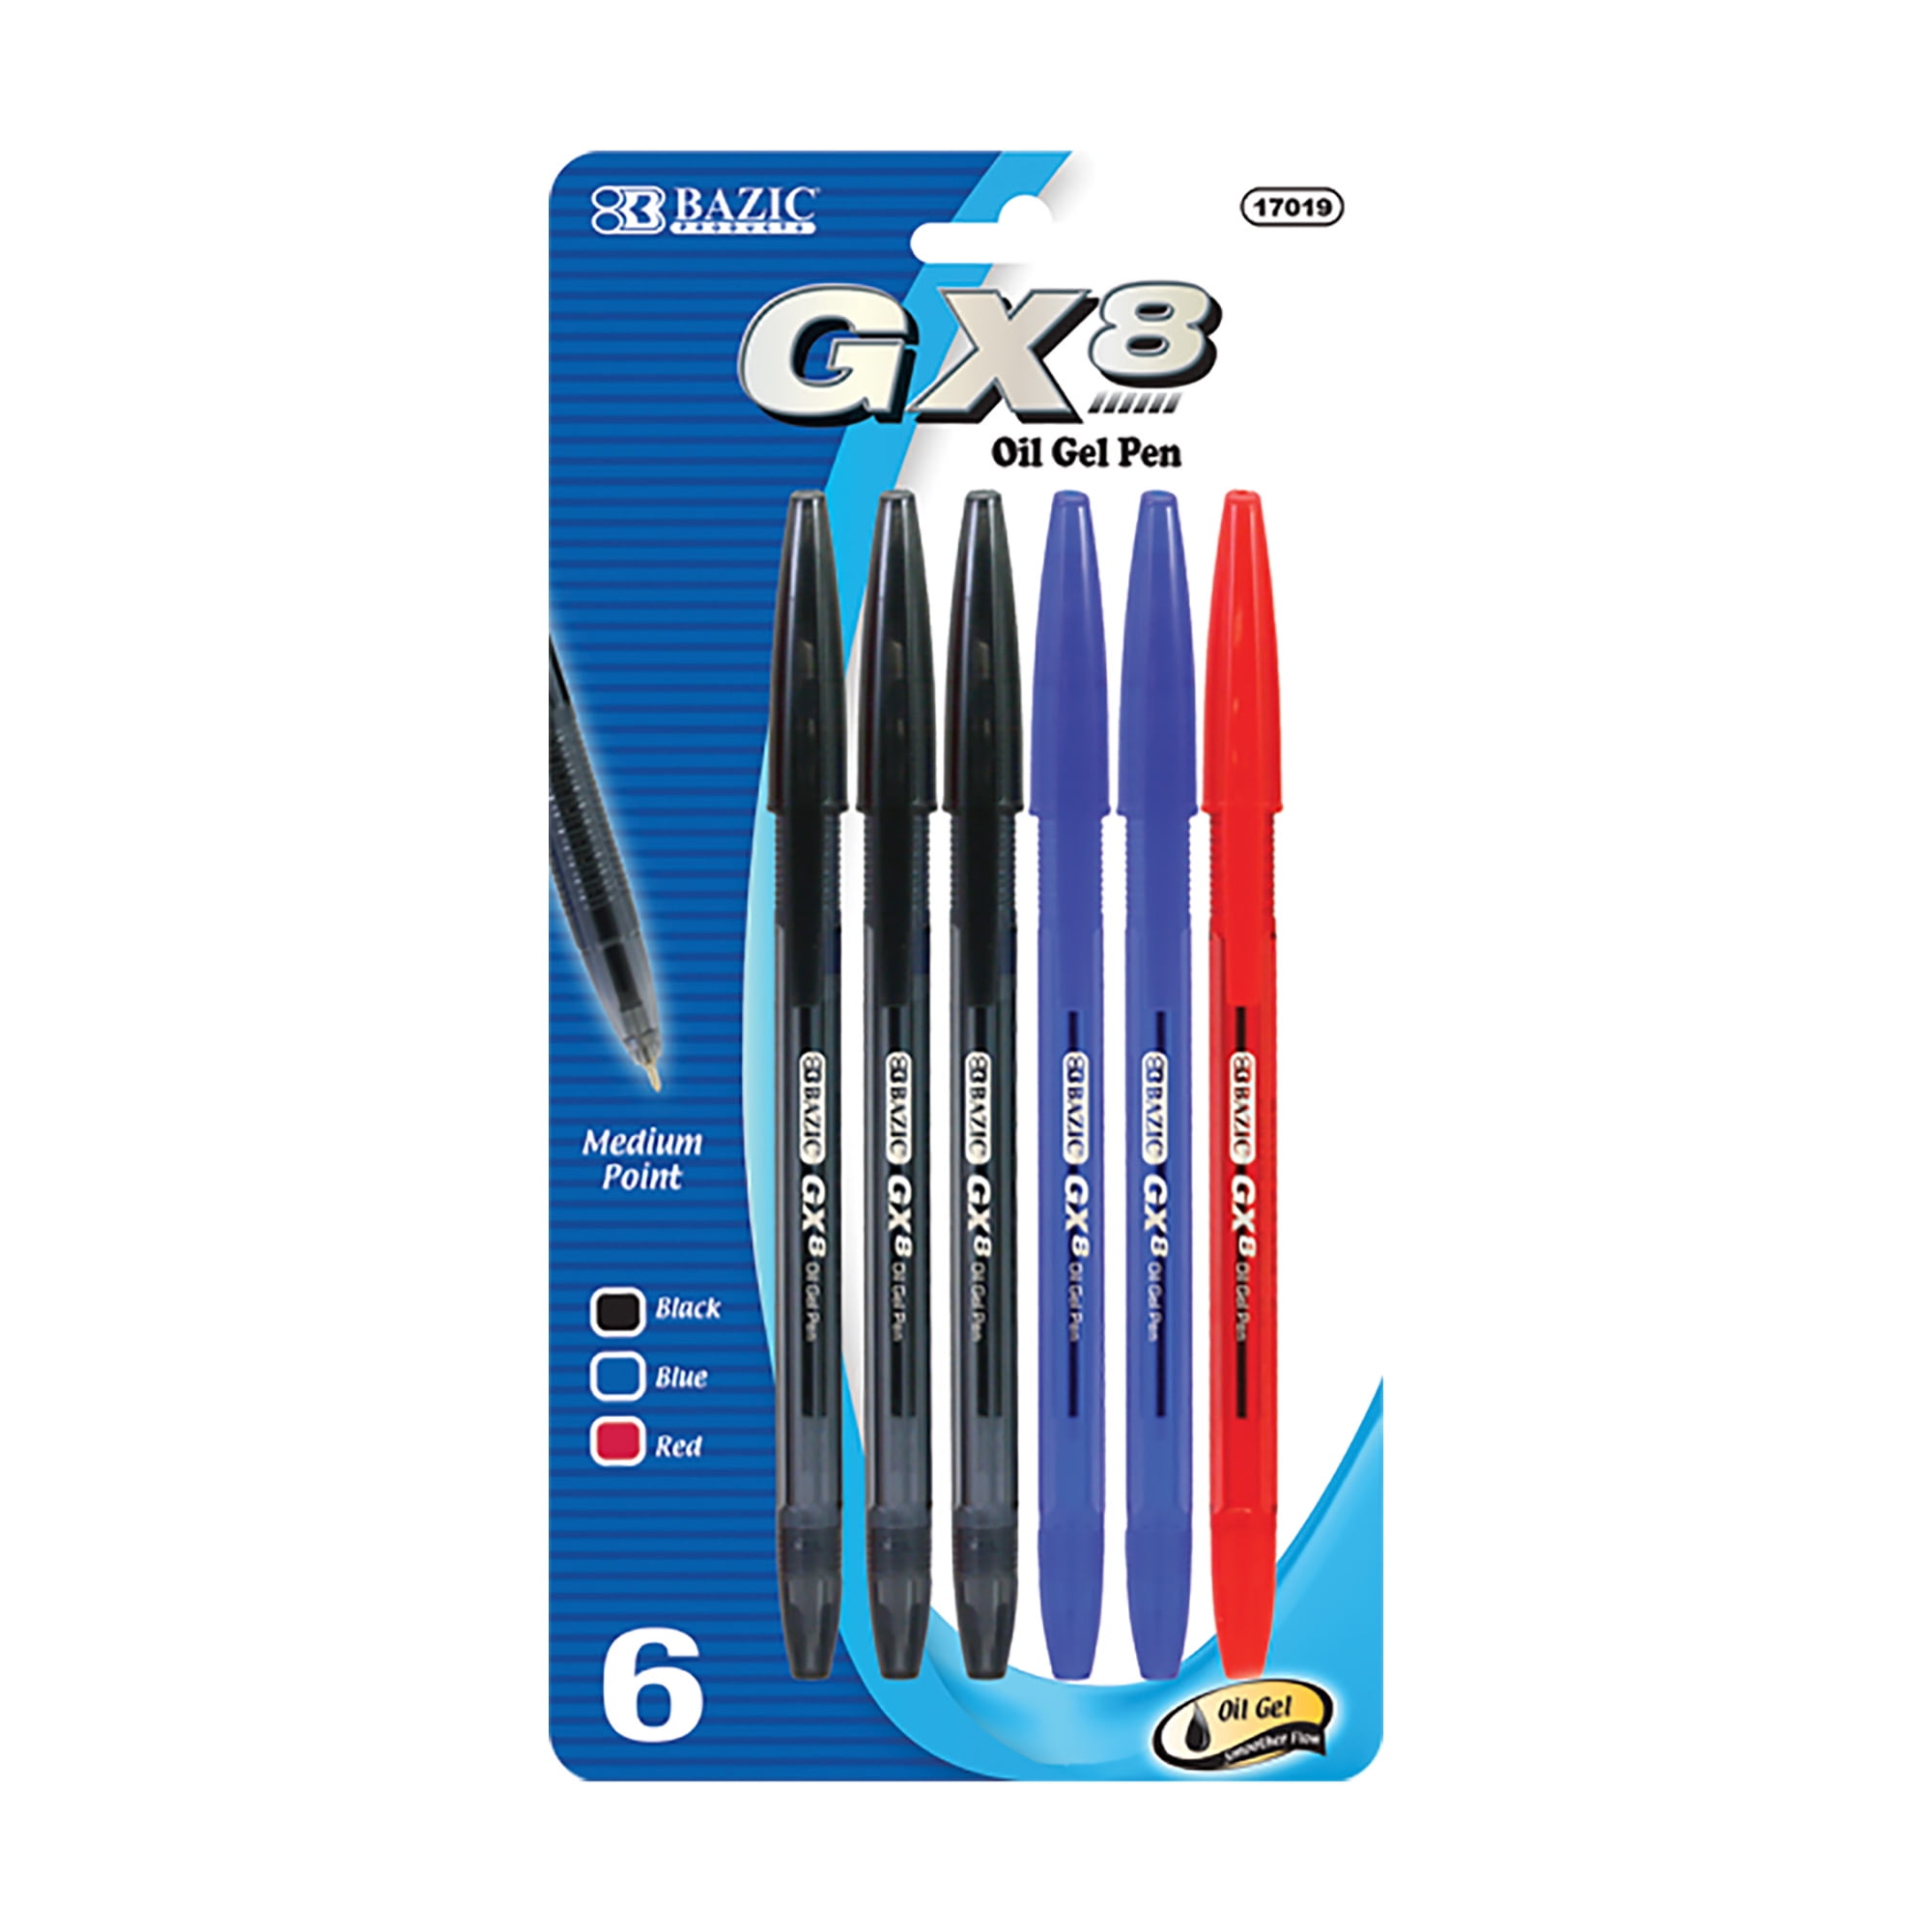 Wrapables Colorful Gel Ink Pens, 0.5mm Fine Point (Set of 9), Cool